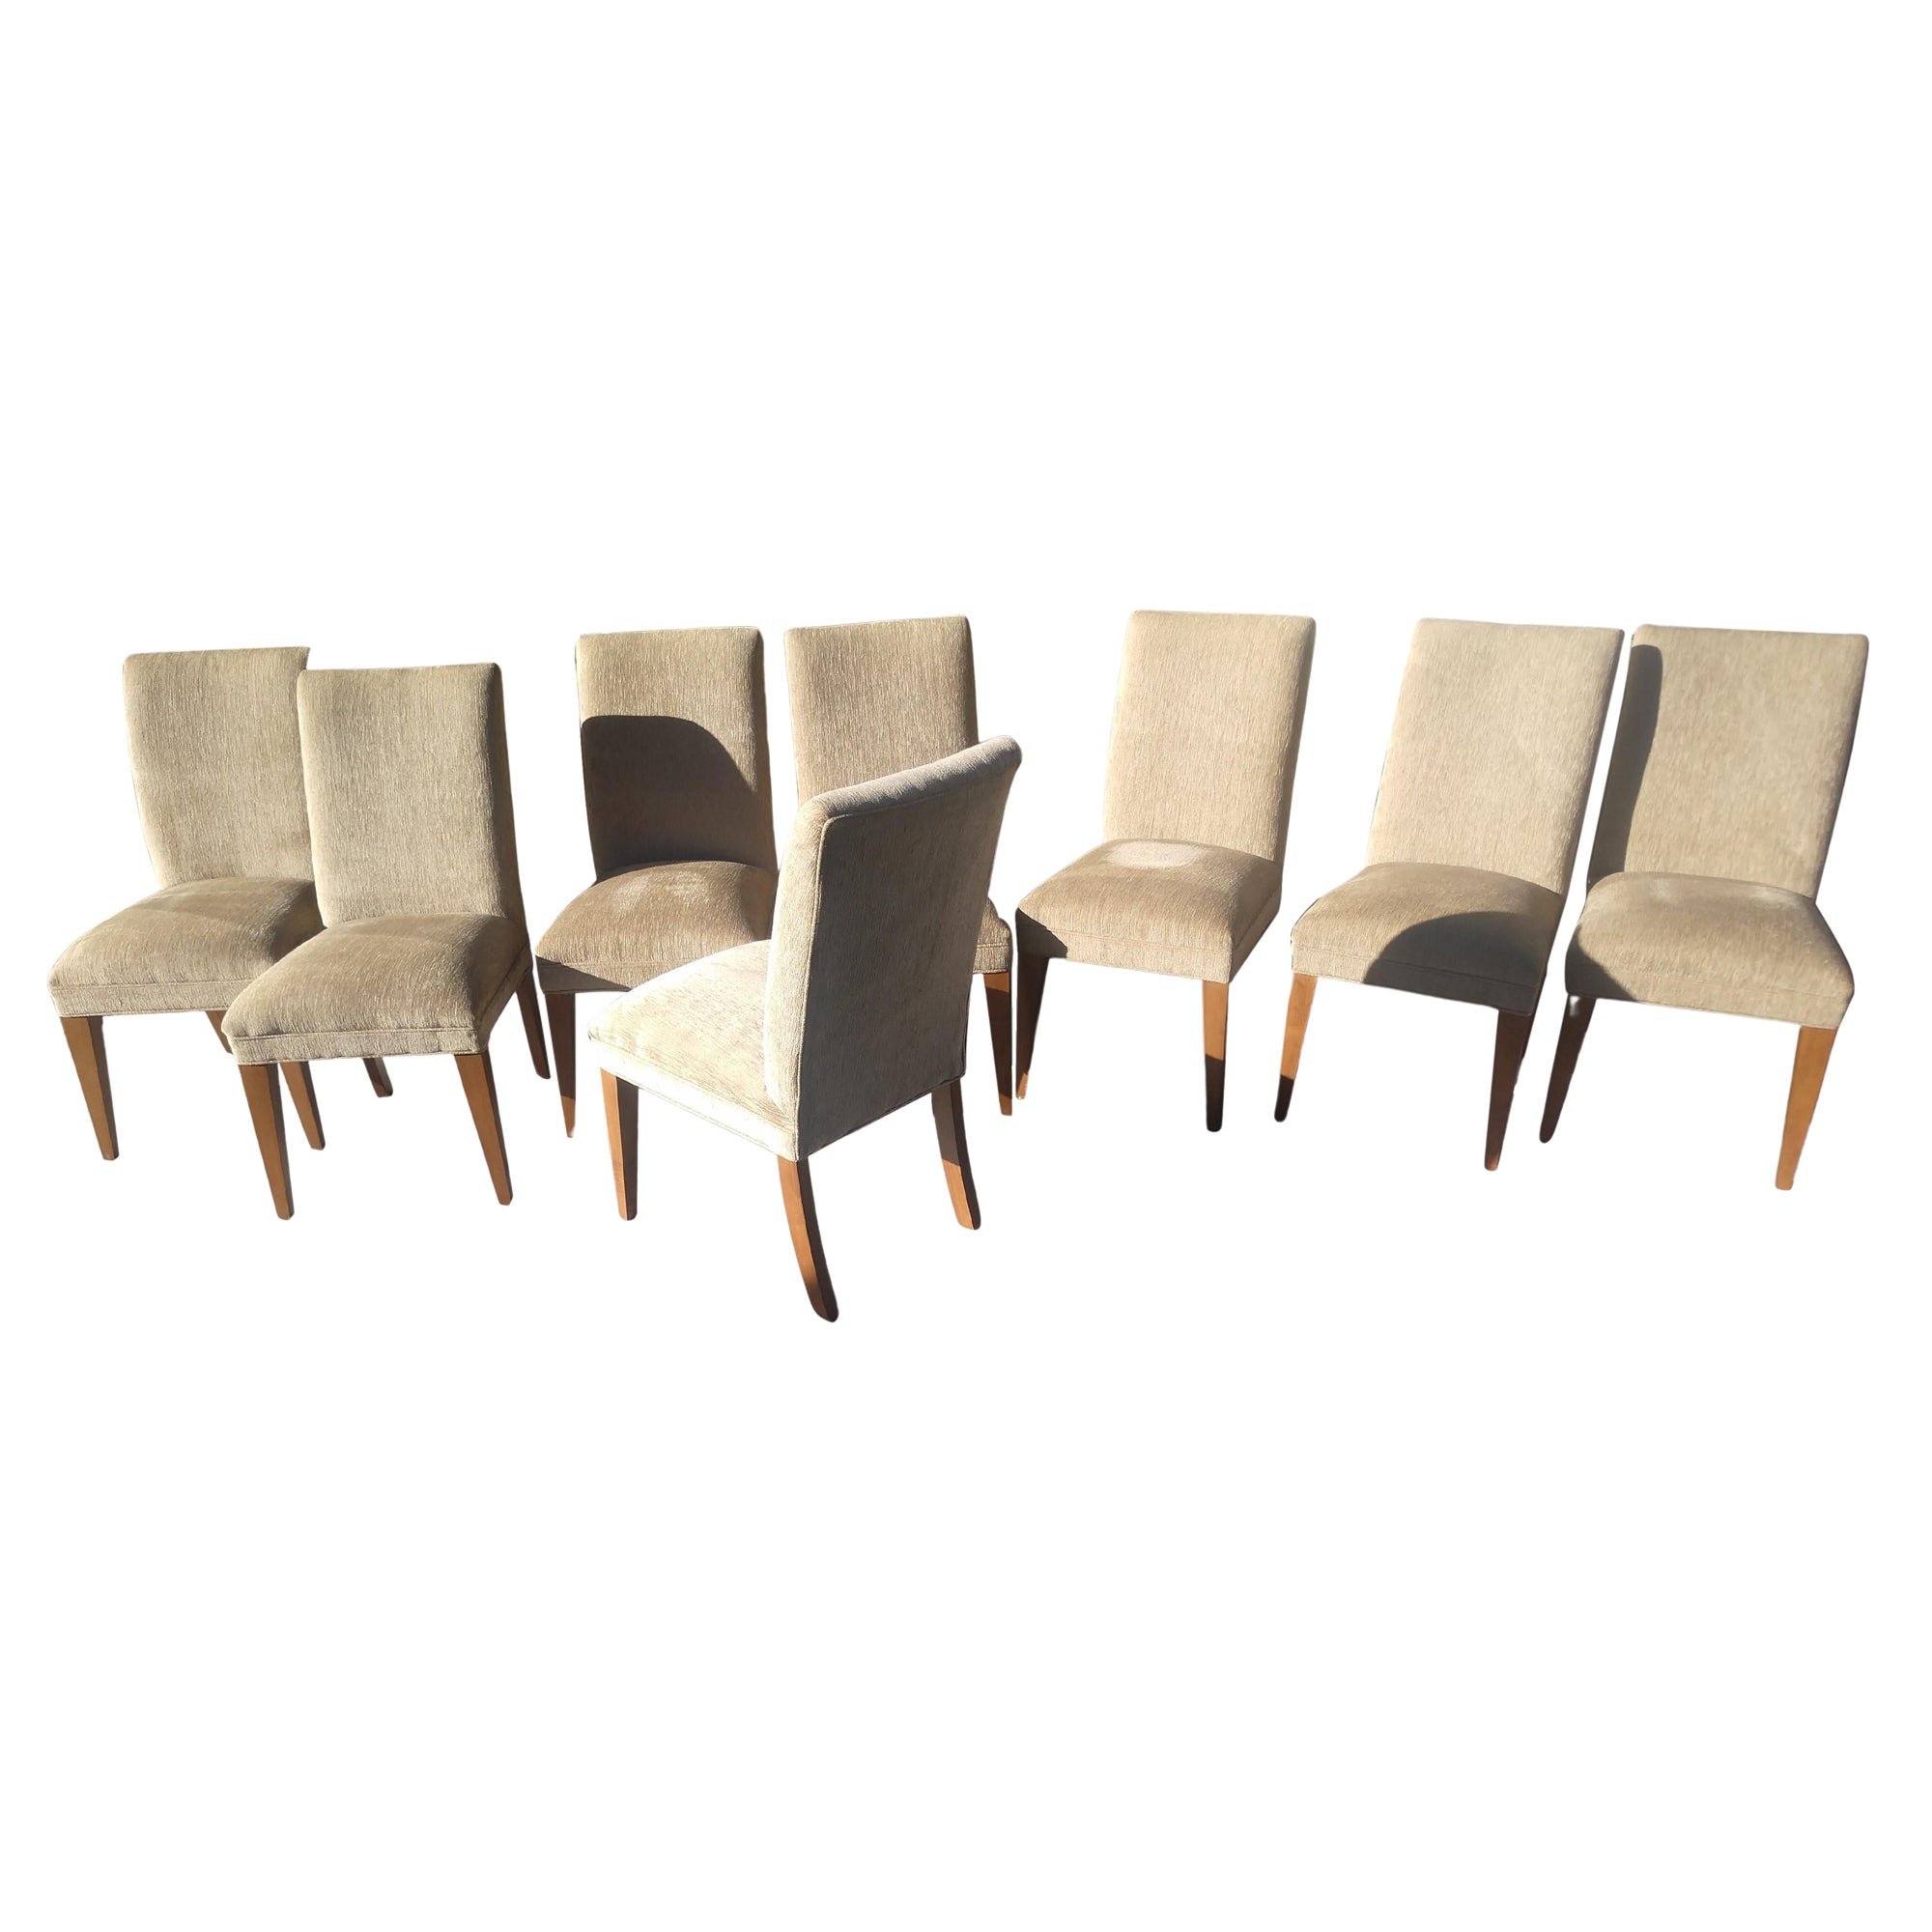 Set of 8 Formal Dining Chairs by Mitchell Gold for Restoration Hardware